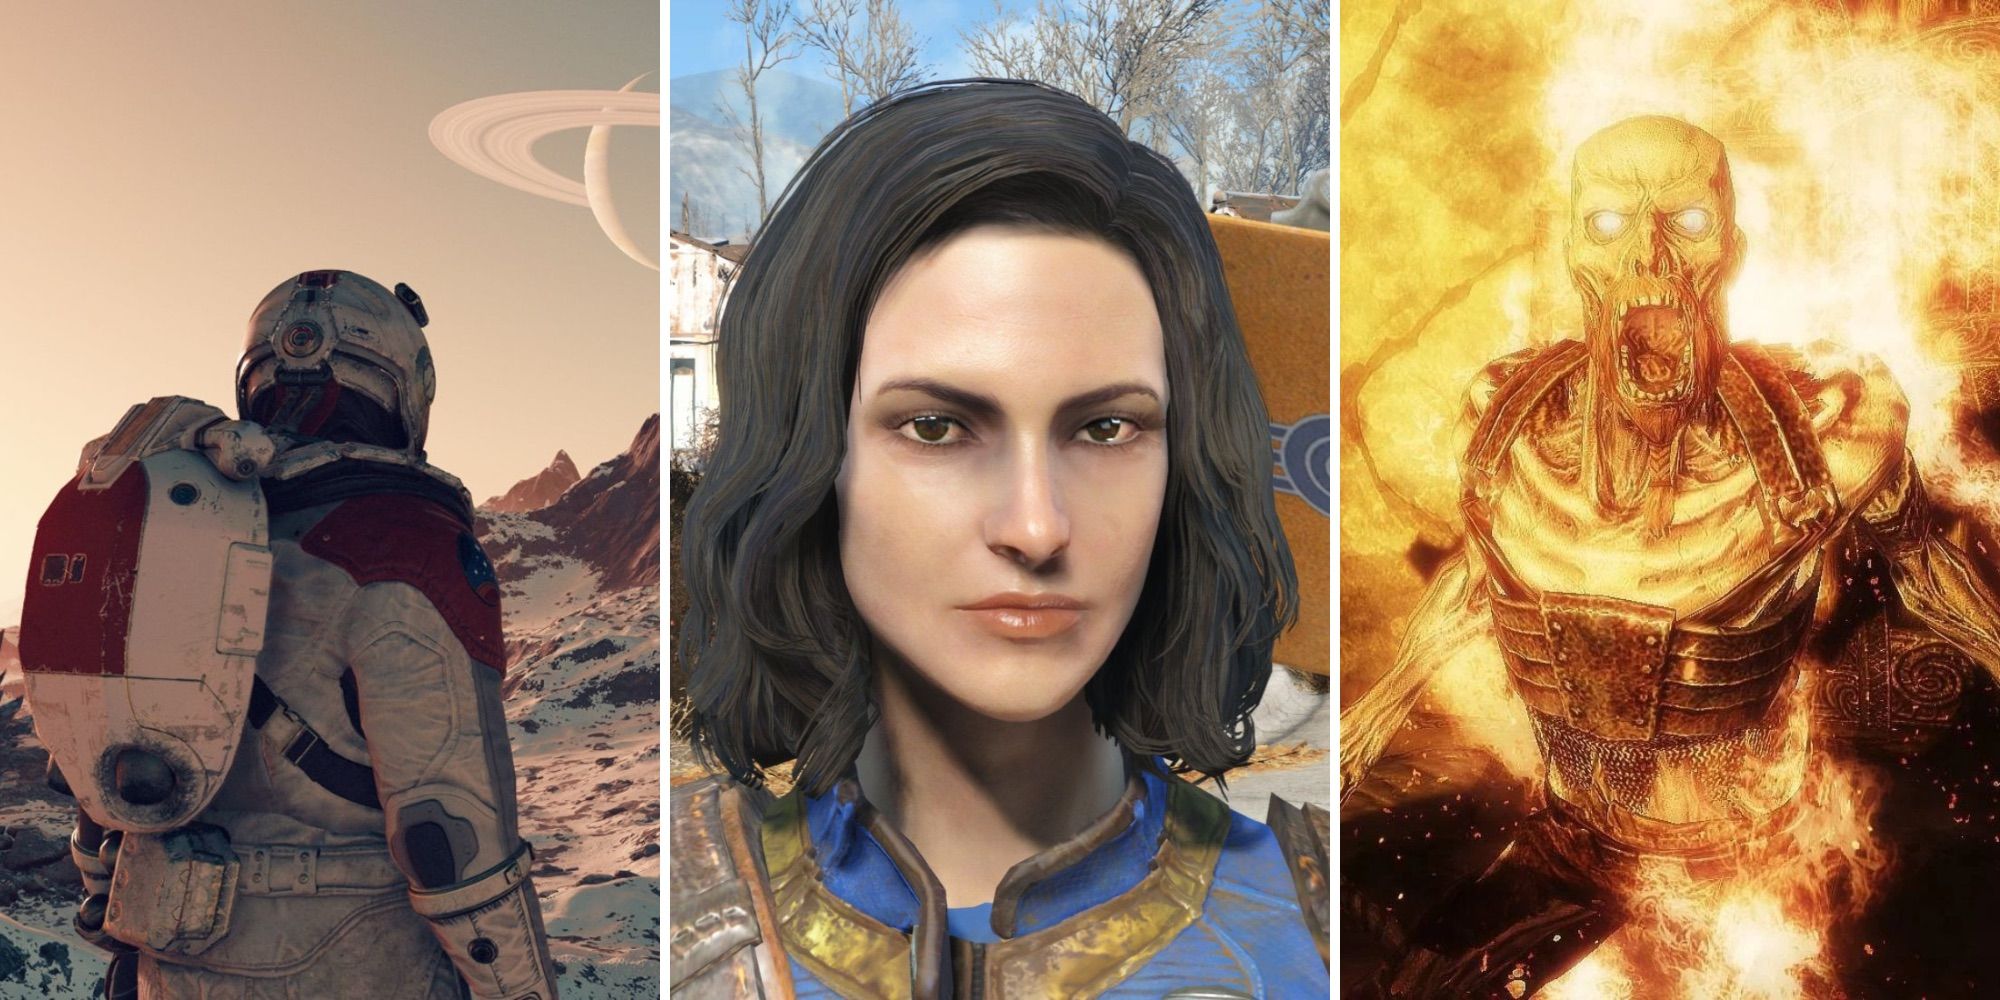 A grid of the Bethesda games Starfield, Fallout 4, and Skyrim